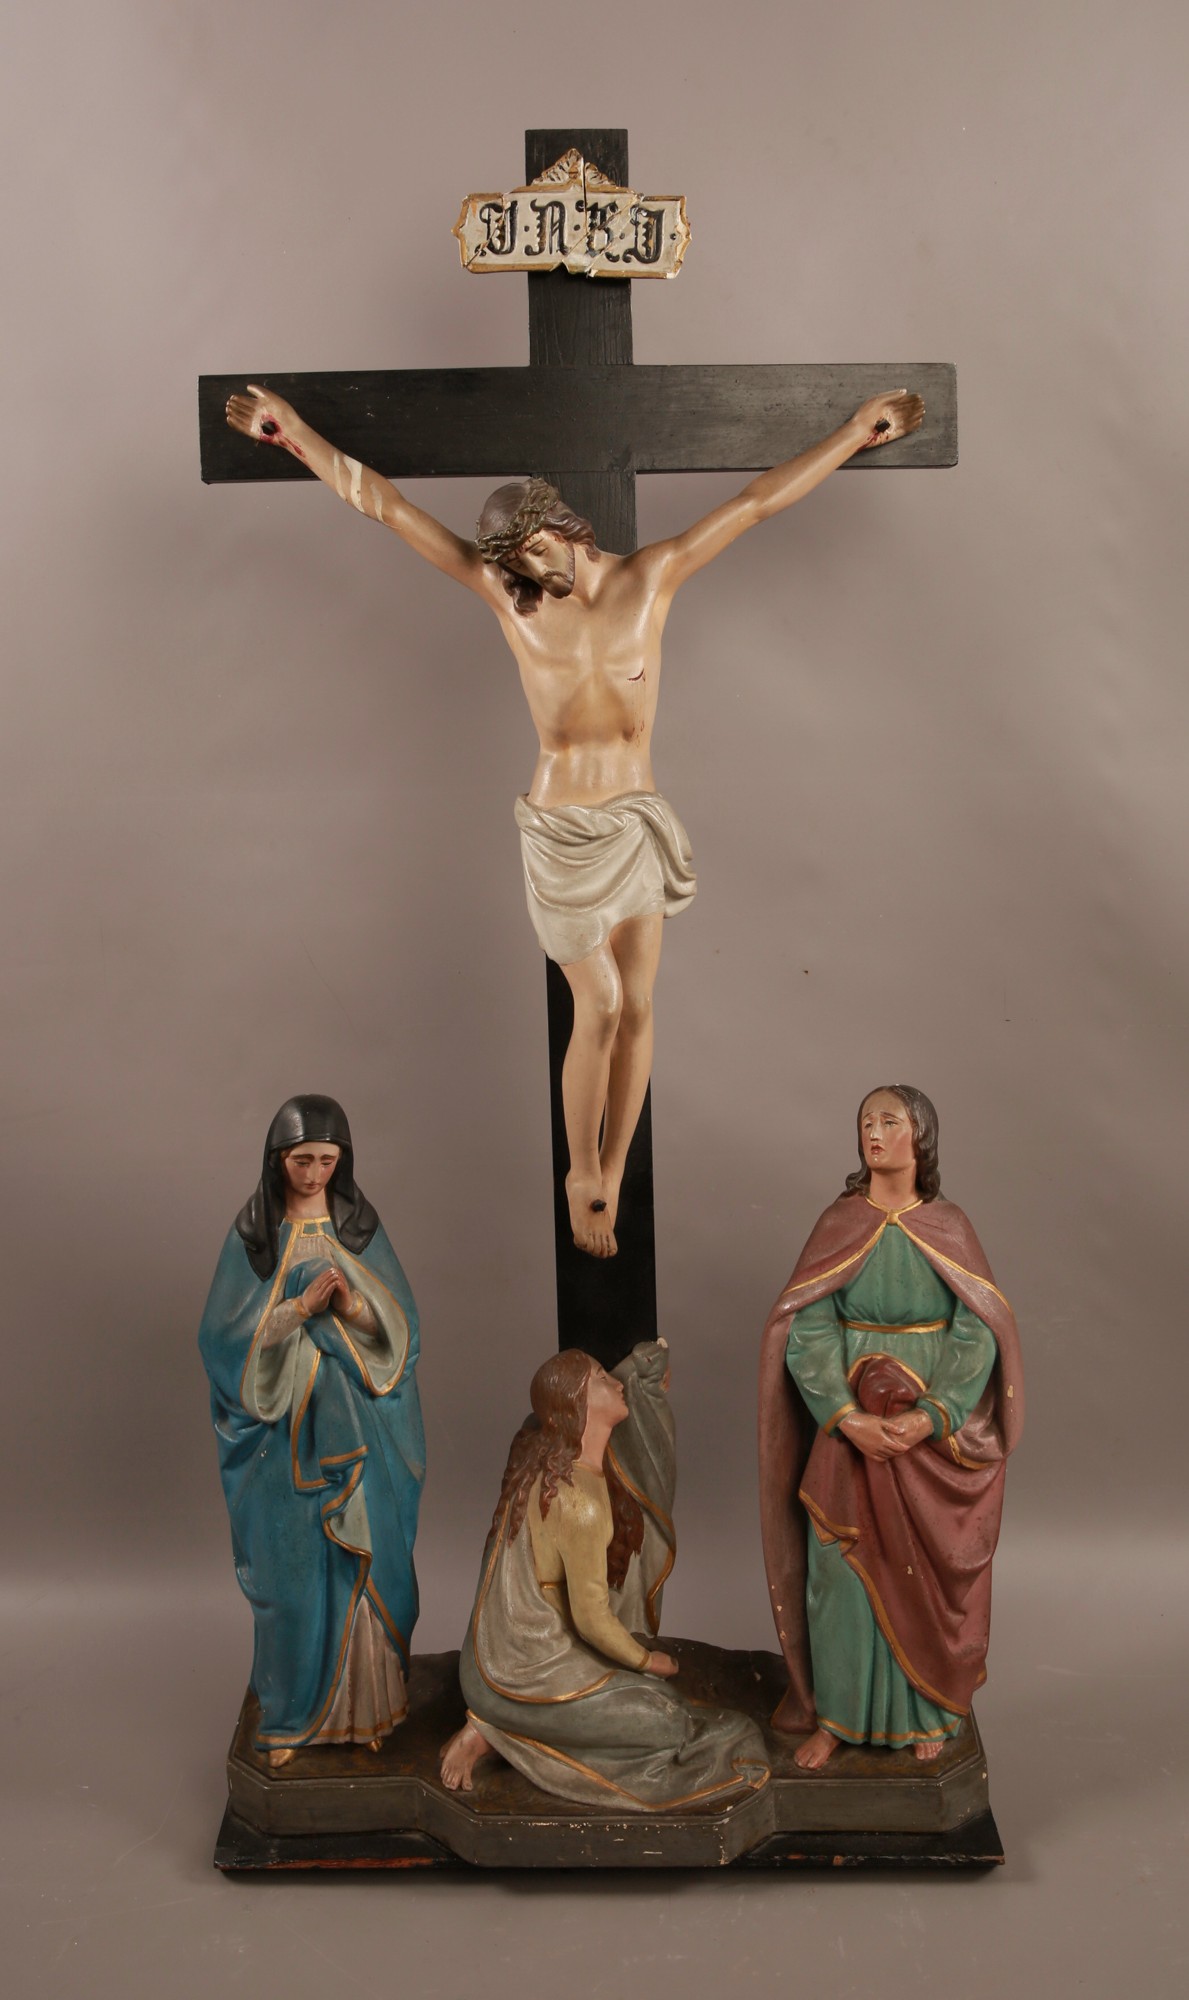 A Large Religious Statue of Jesus on the Cross Early 1900s 115cm Tall #93